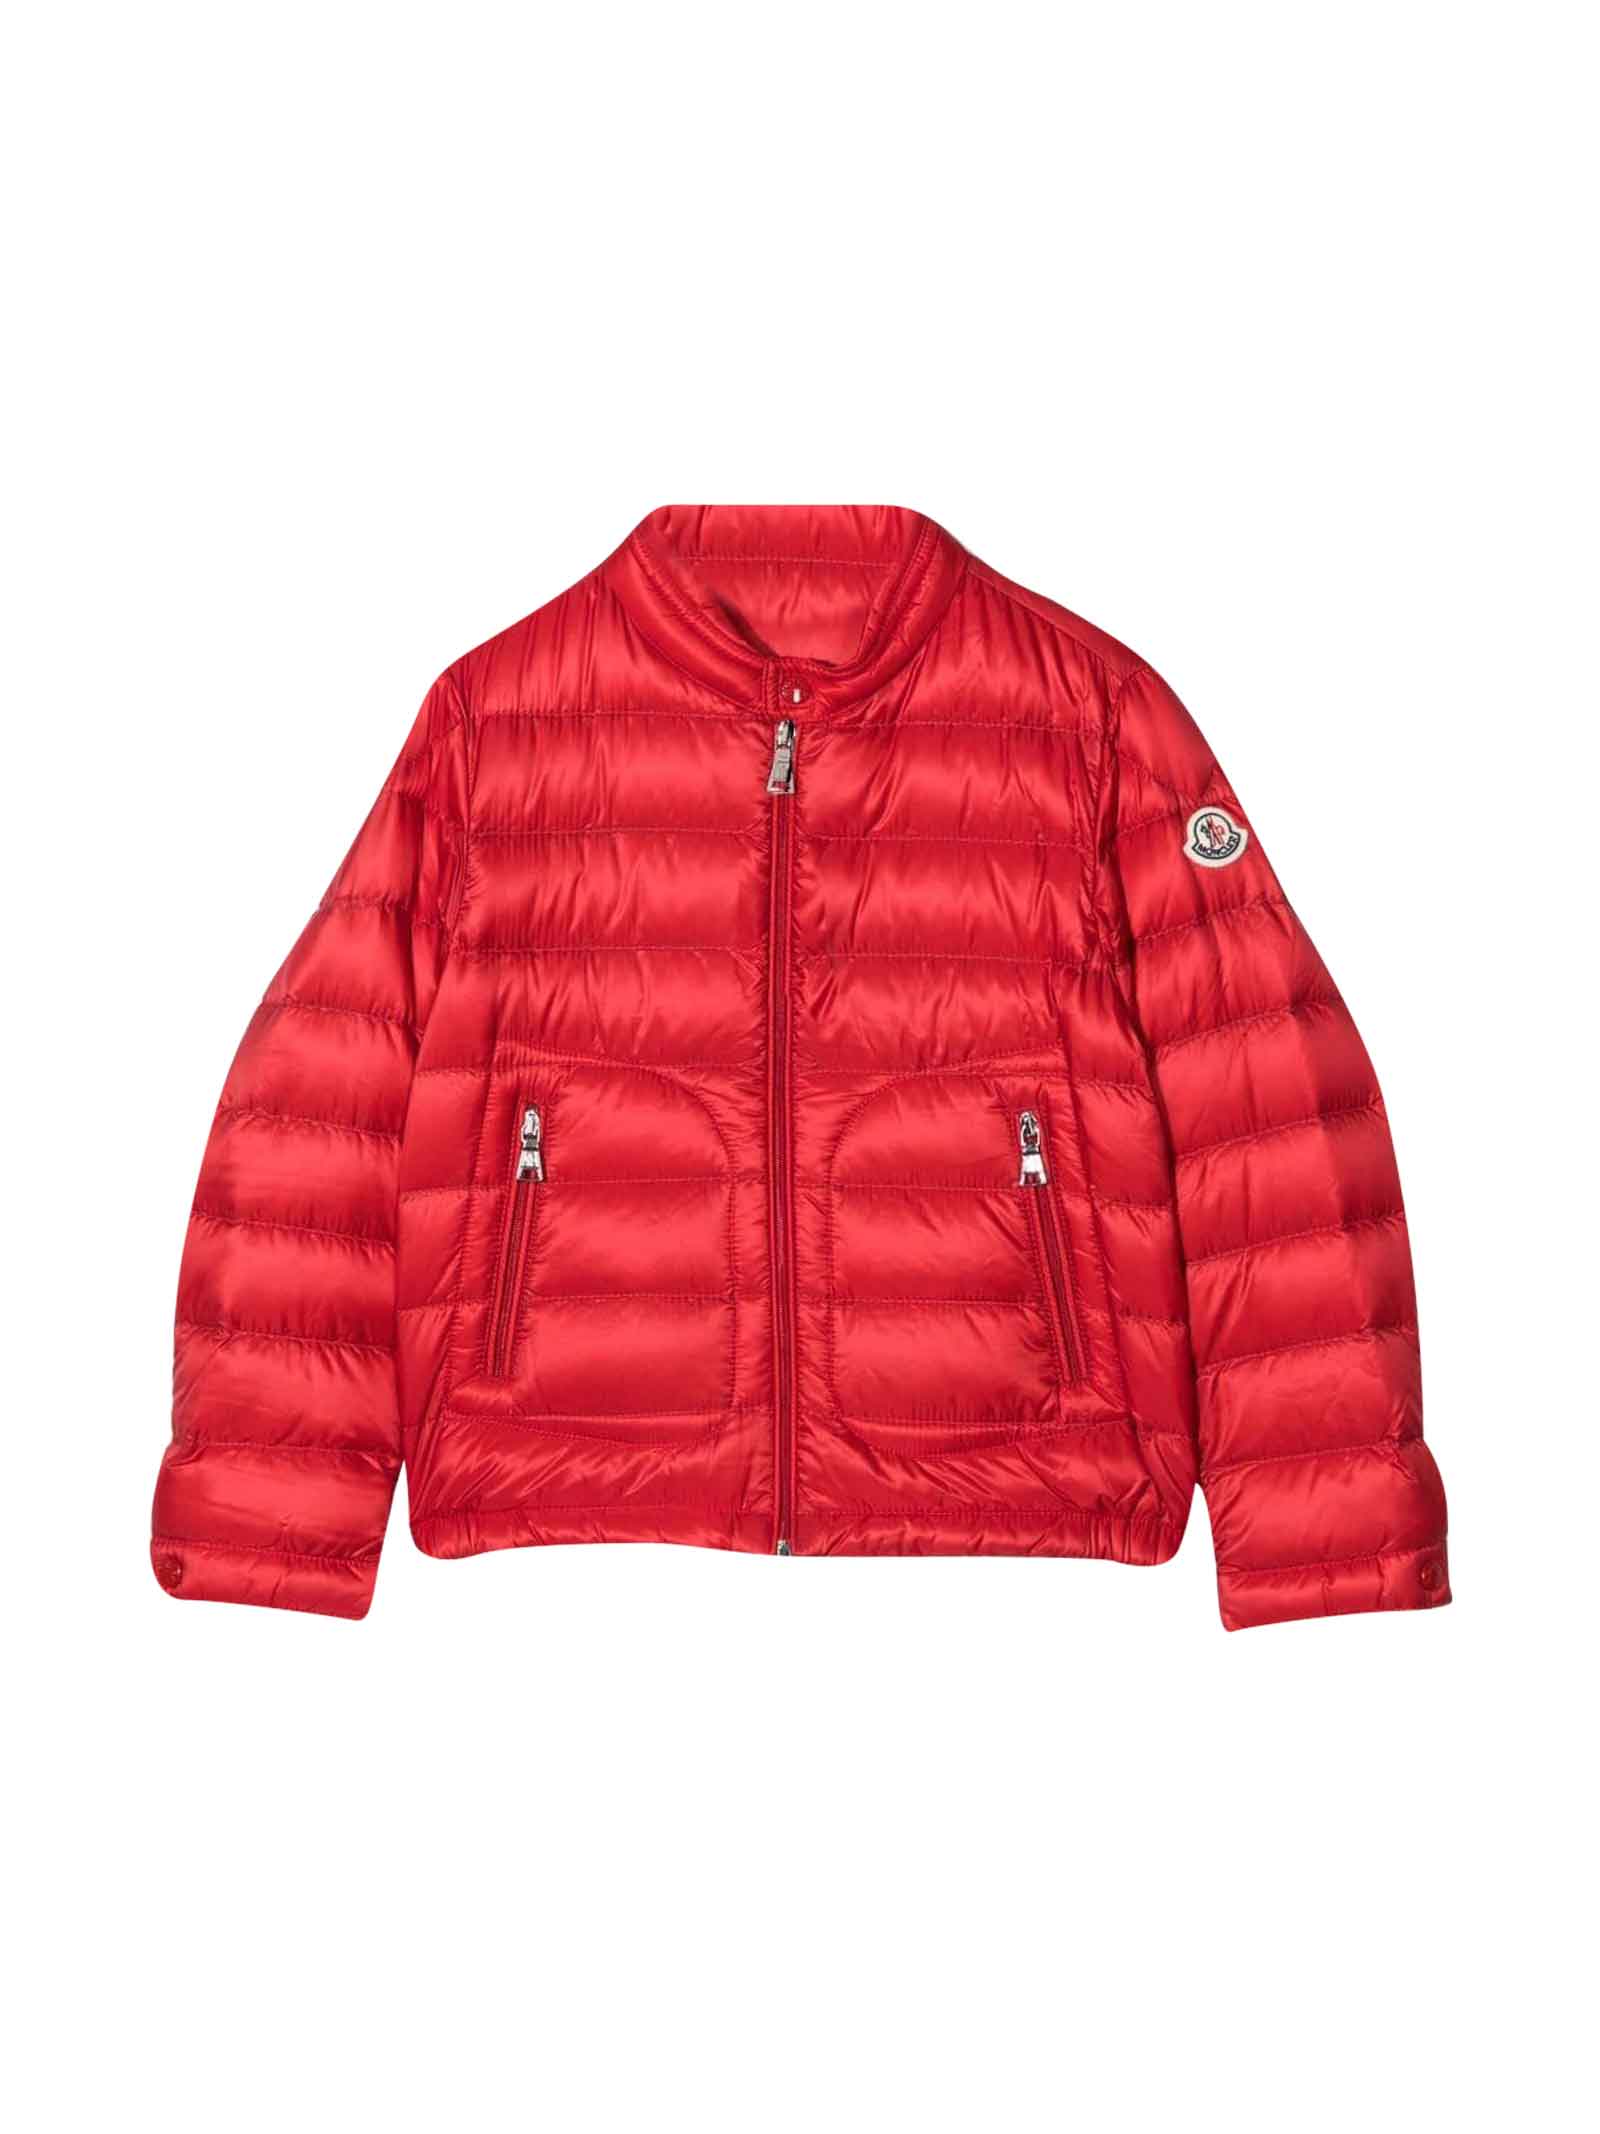 Moncler Red Down Jacket Unisex